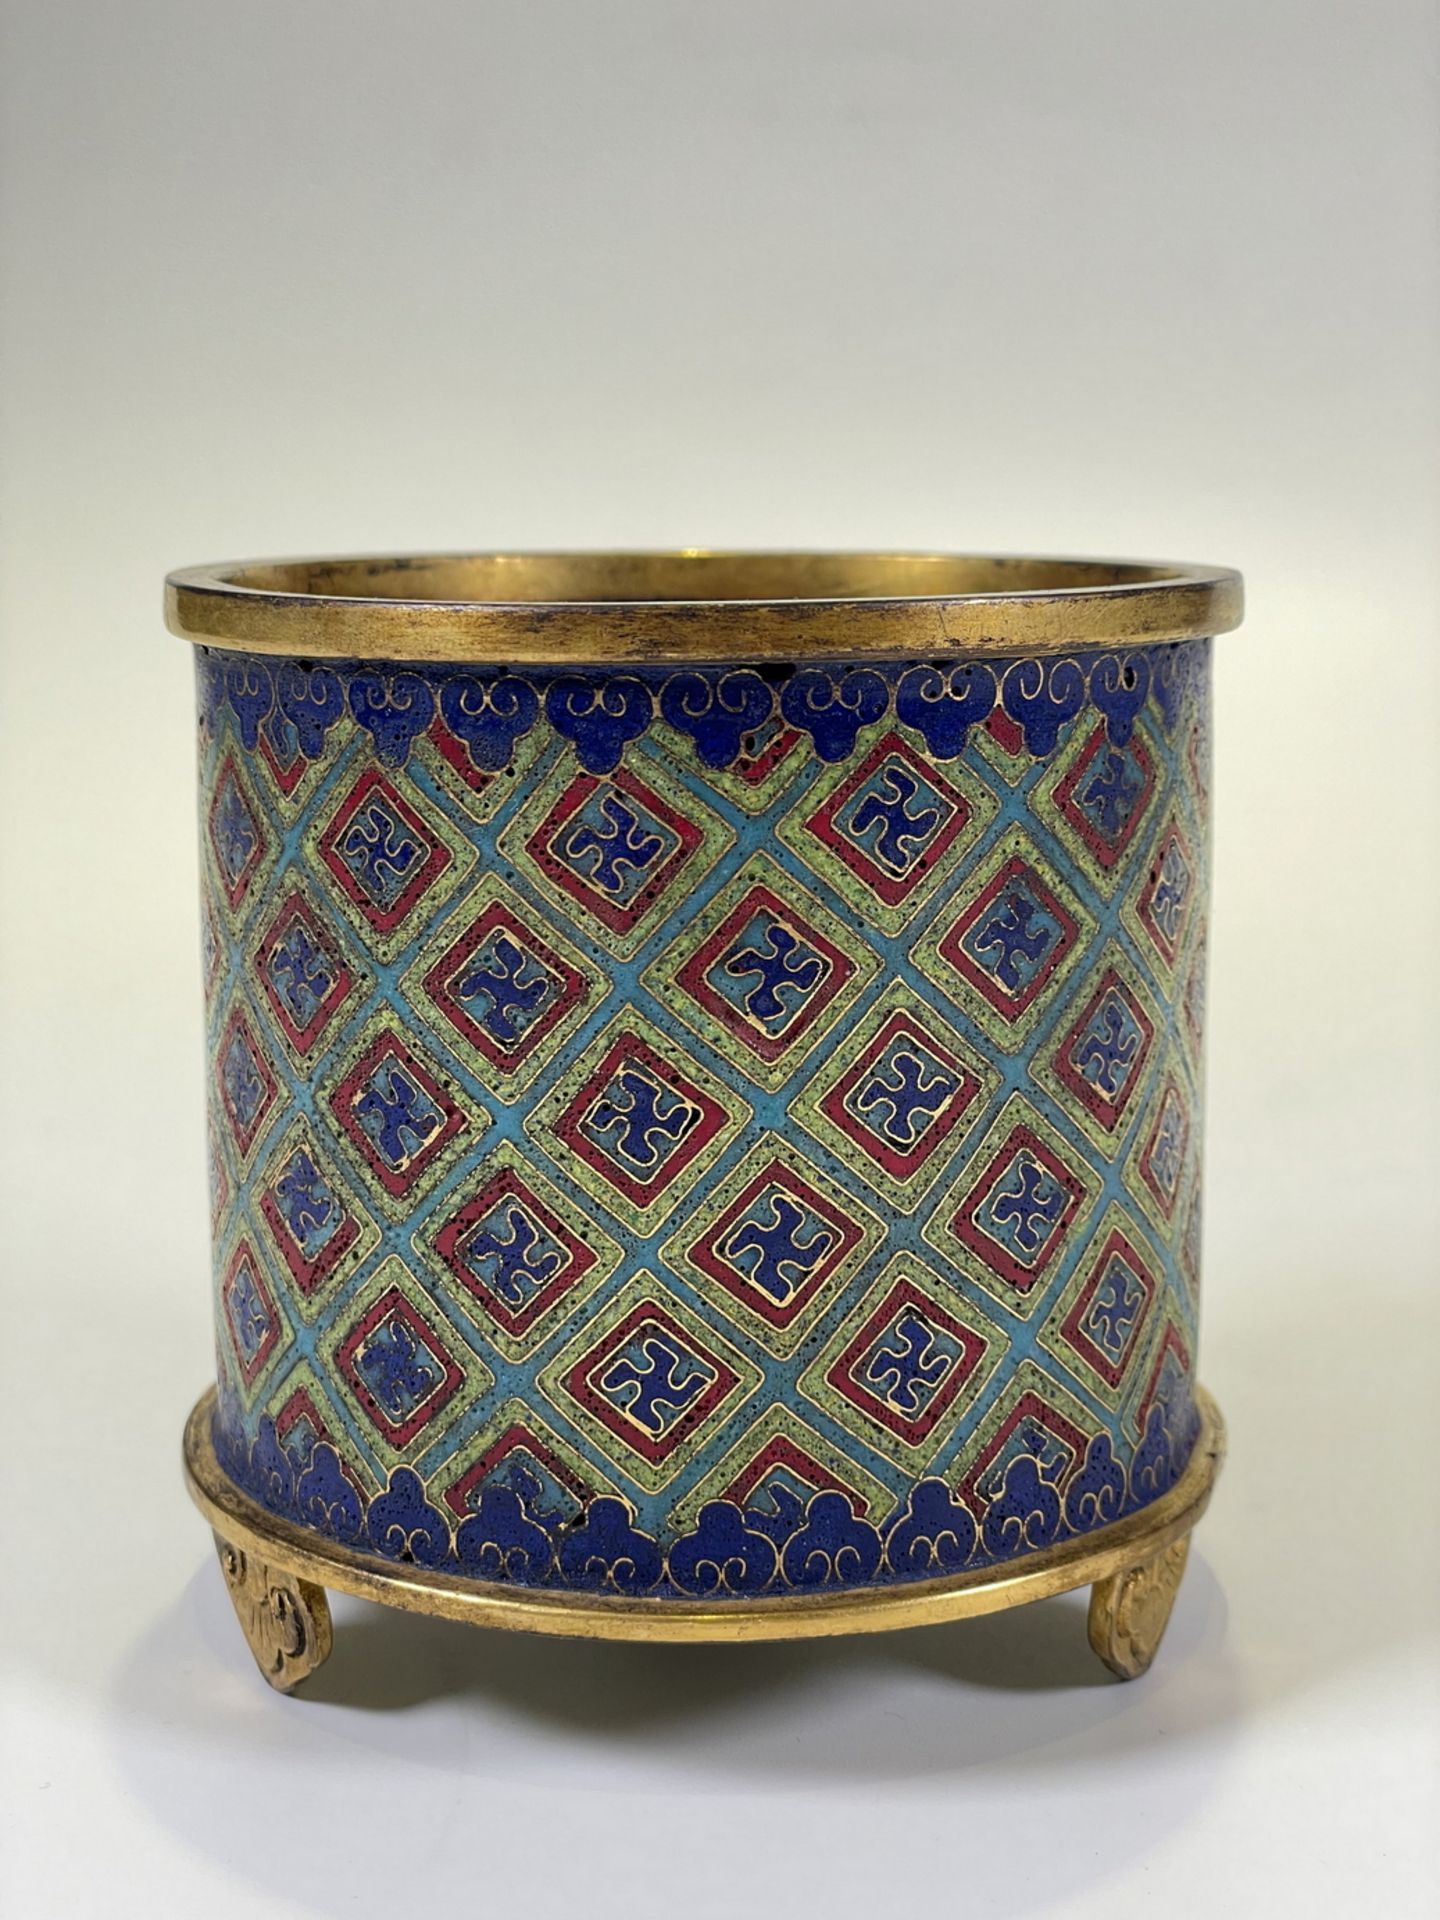 FINE CHINESE CLOISONNE, 18TH/19TH Century Pr. Collection of NARA private gallary.  - Image 3 of 11